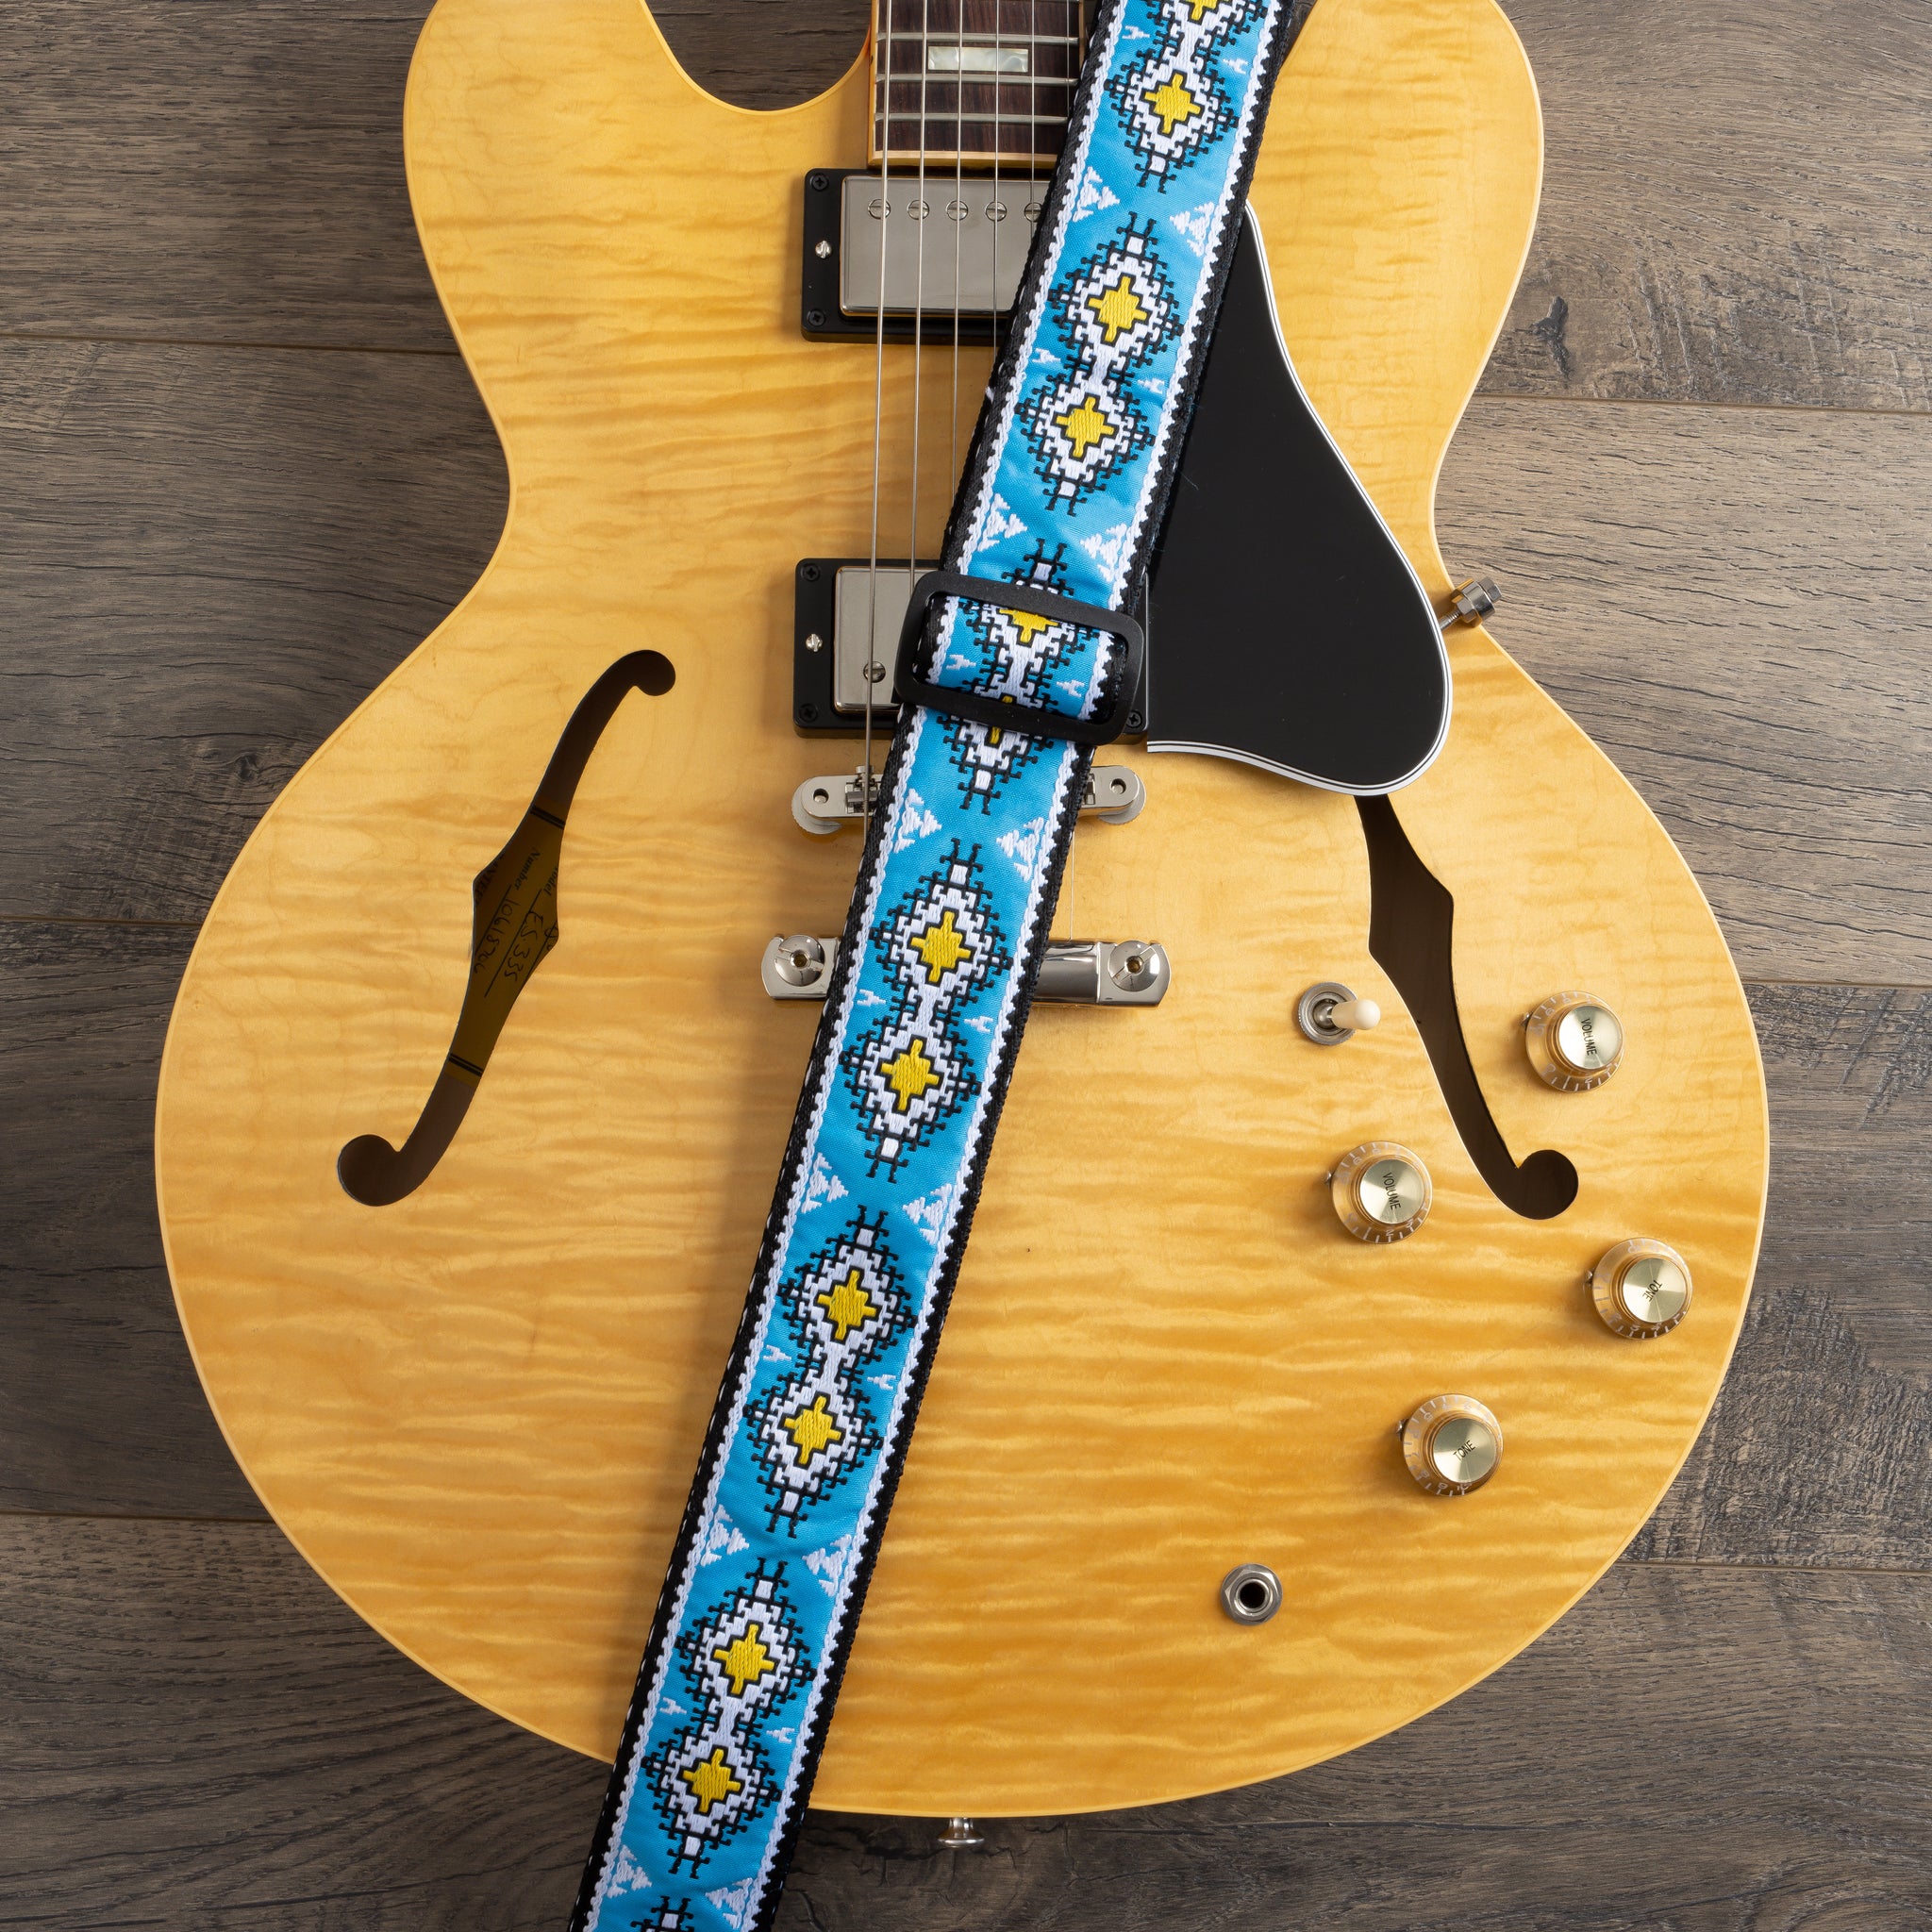 KLIQ Vintage Woven Guitar Strap for Acoustic and Electric Guitars